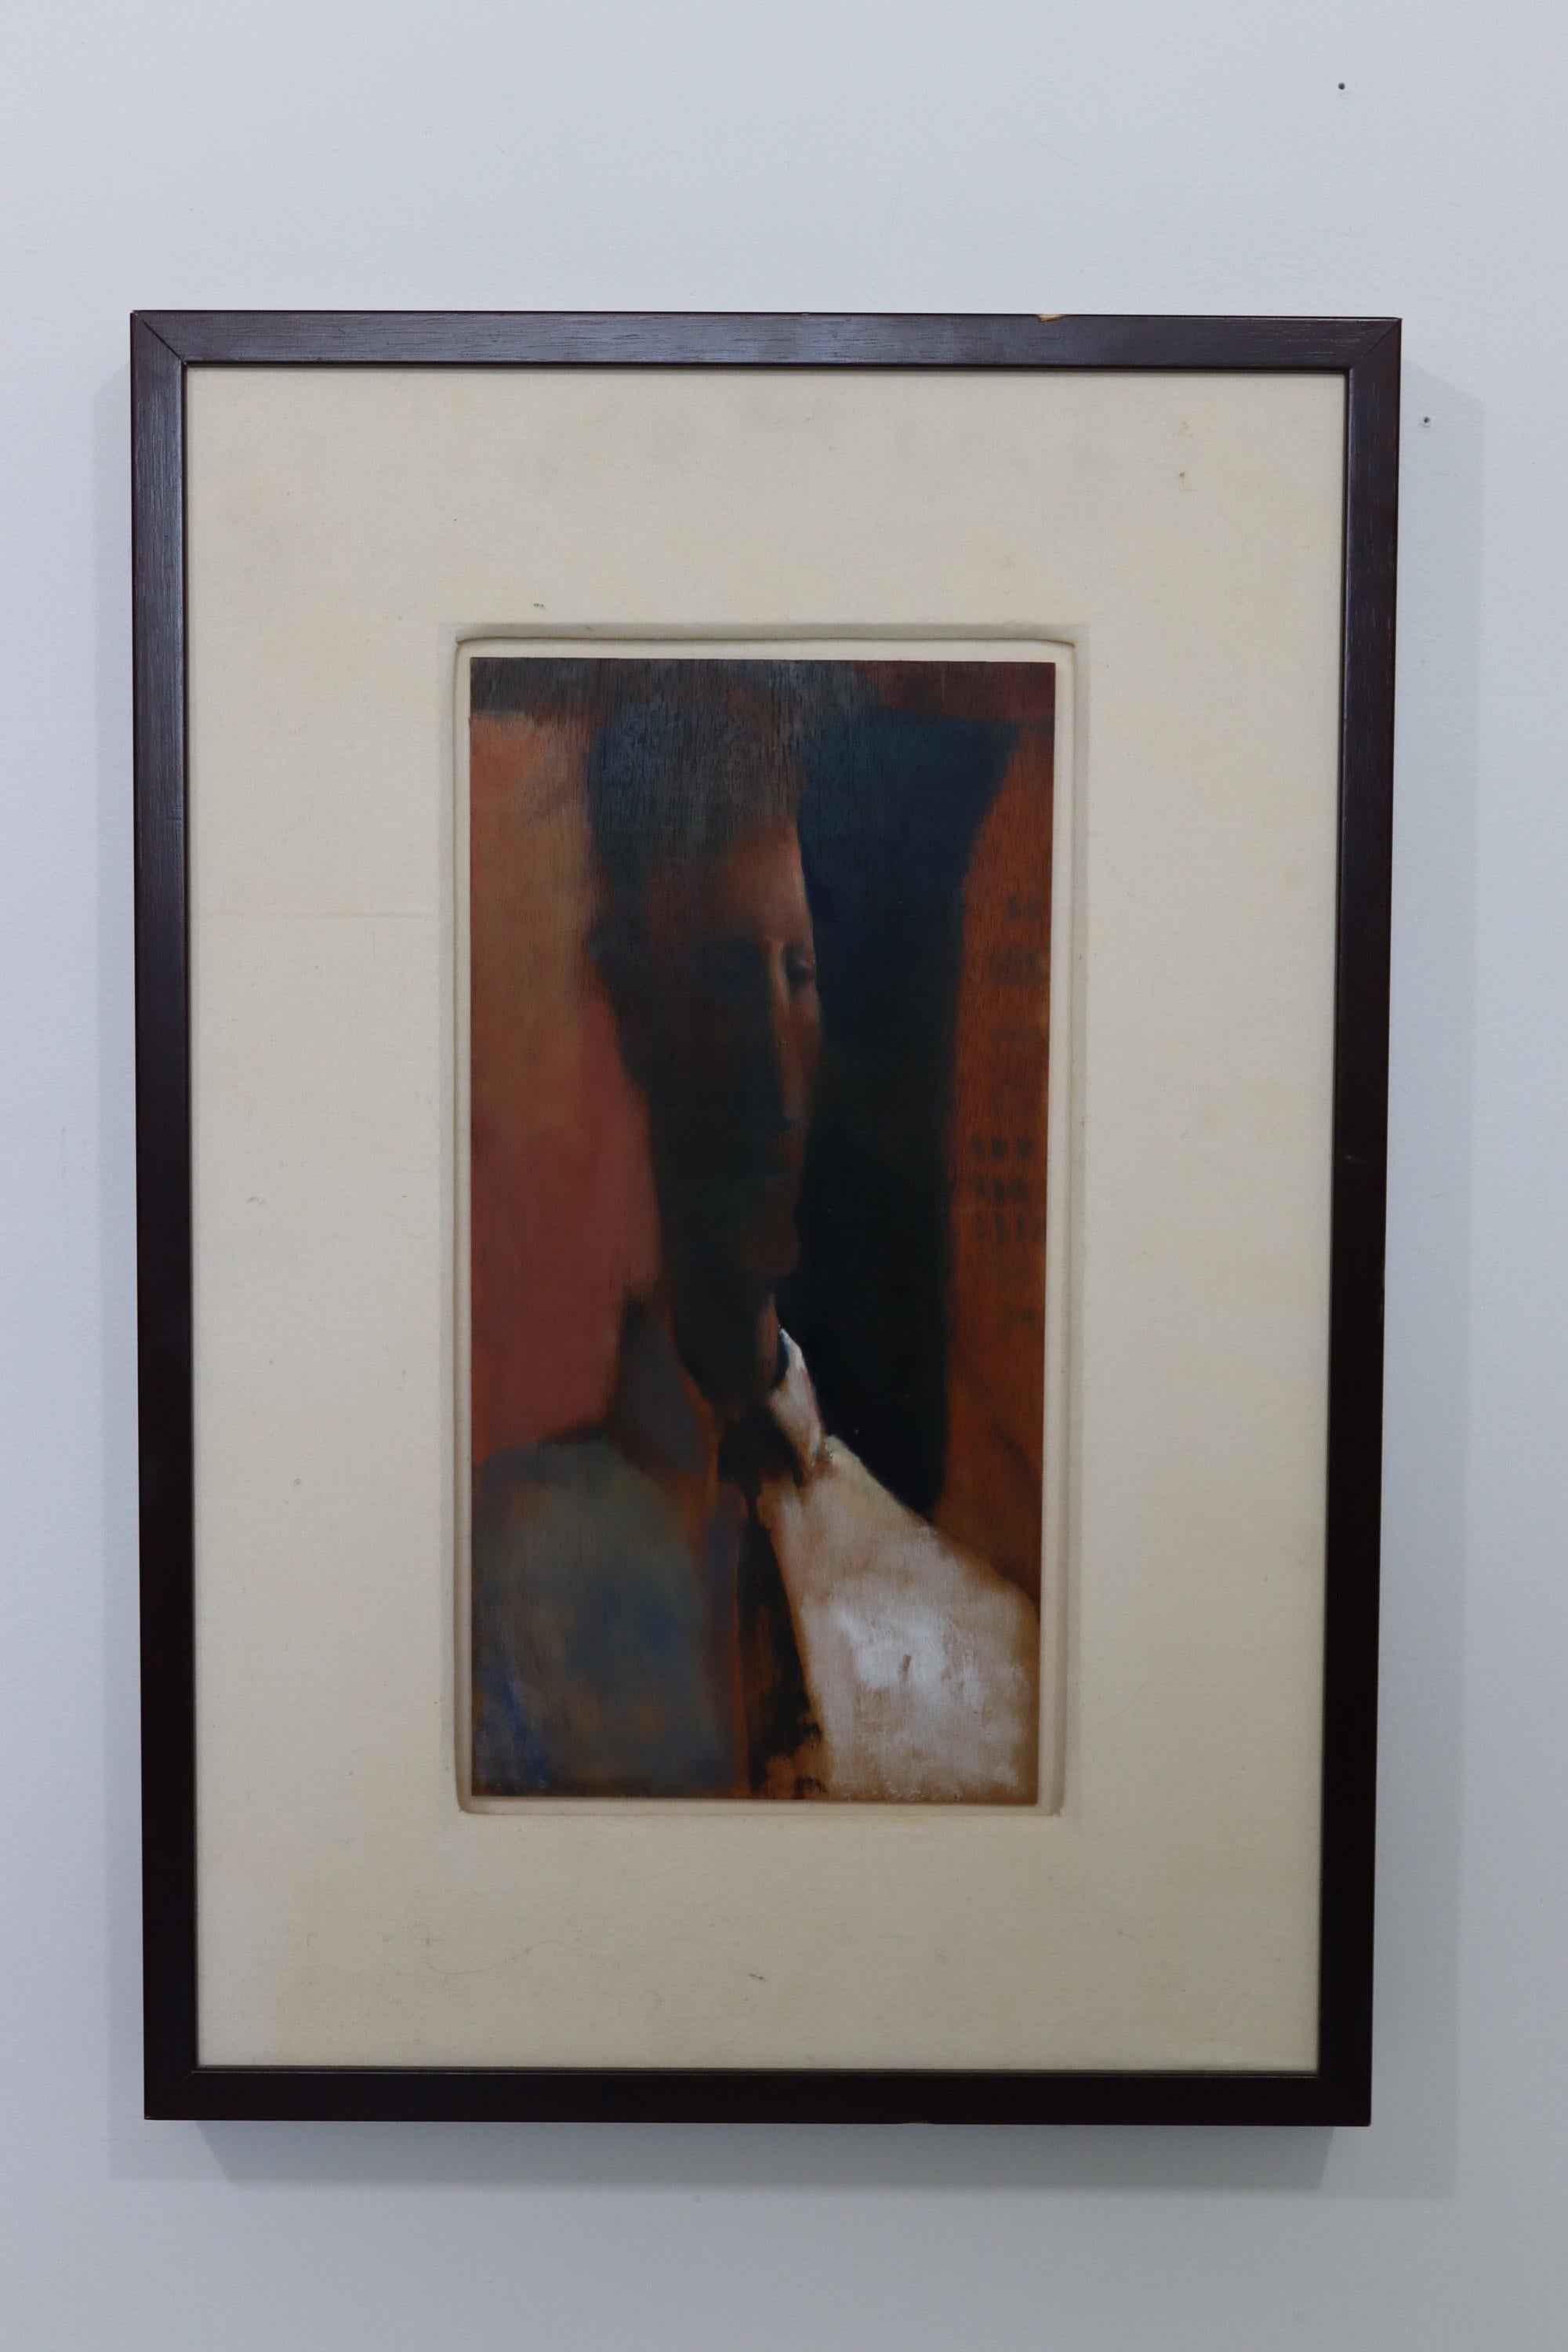 For your consideration is a Modigliani-inspired portrait painting on paper titled In the Dark #17 and signed on verso by S. Thomas. 


Dimensions: 25 H x 17.5 W (framed). In excellent condition.
 